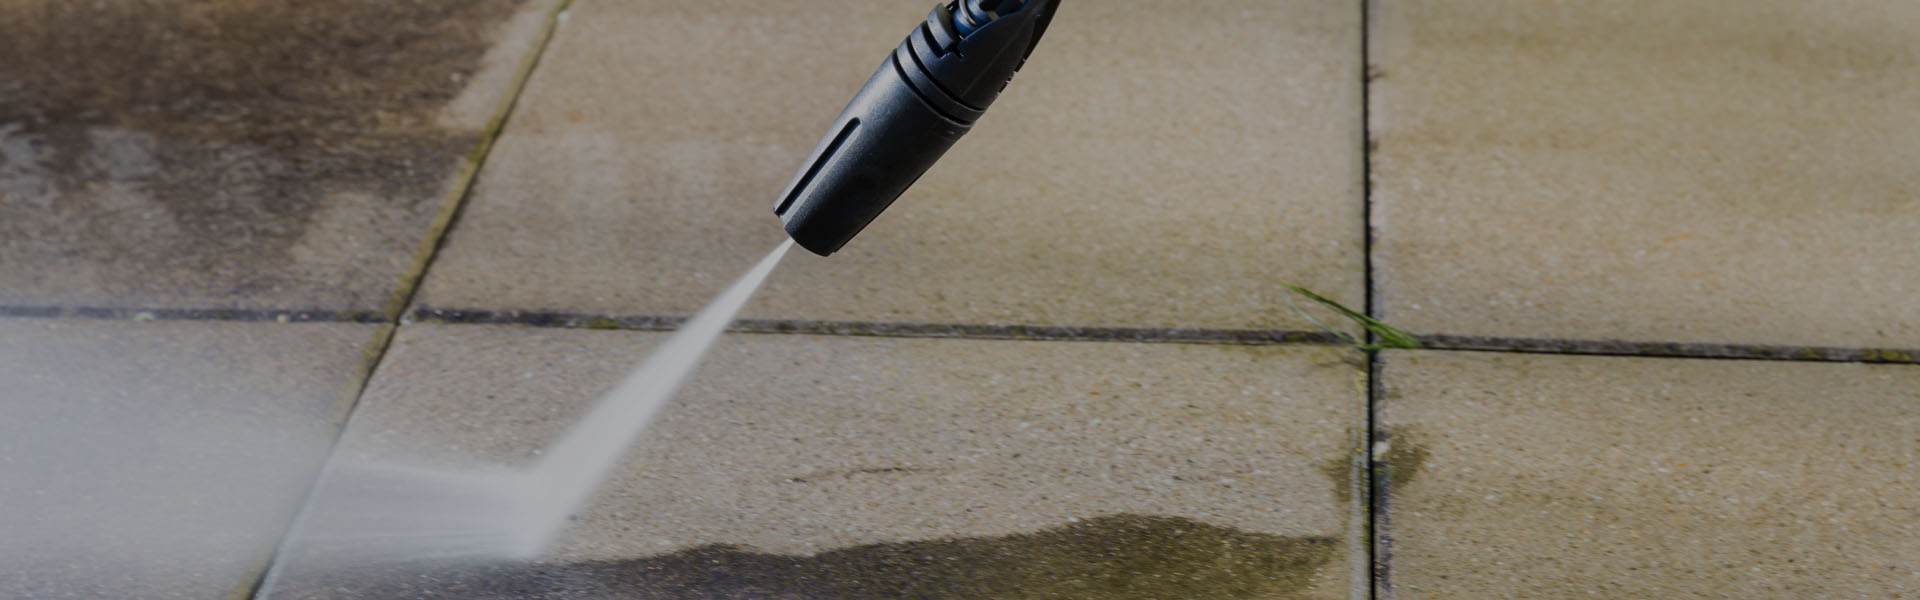 paving-cleaning-image